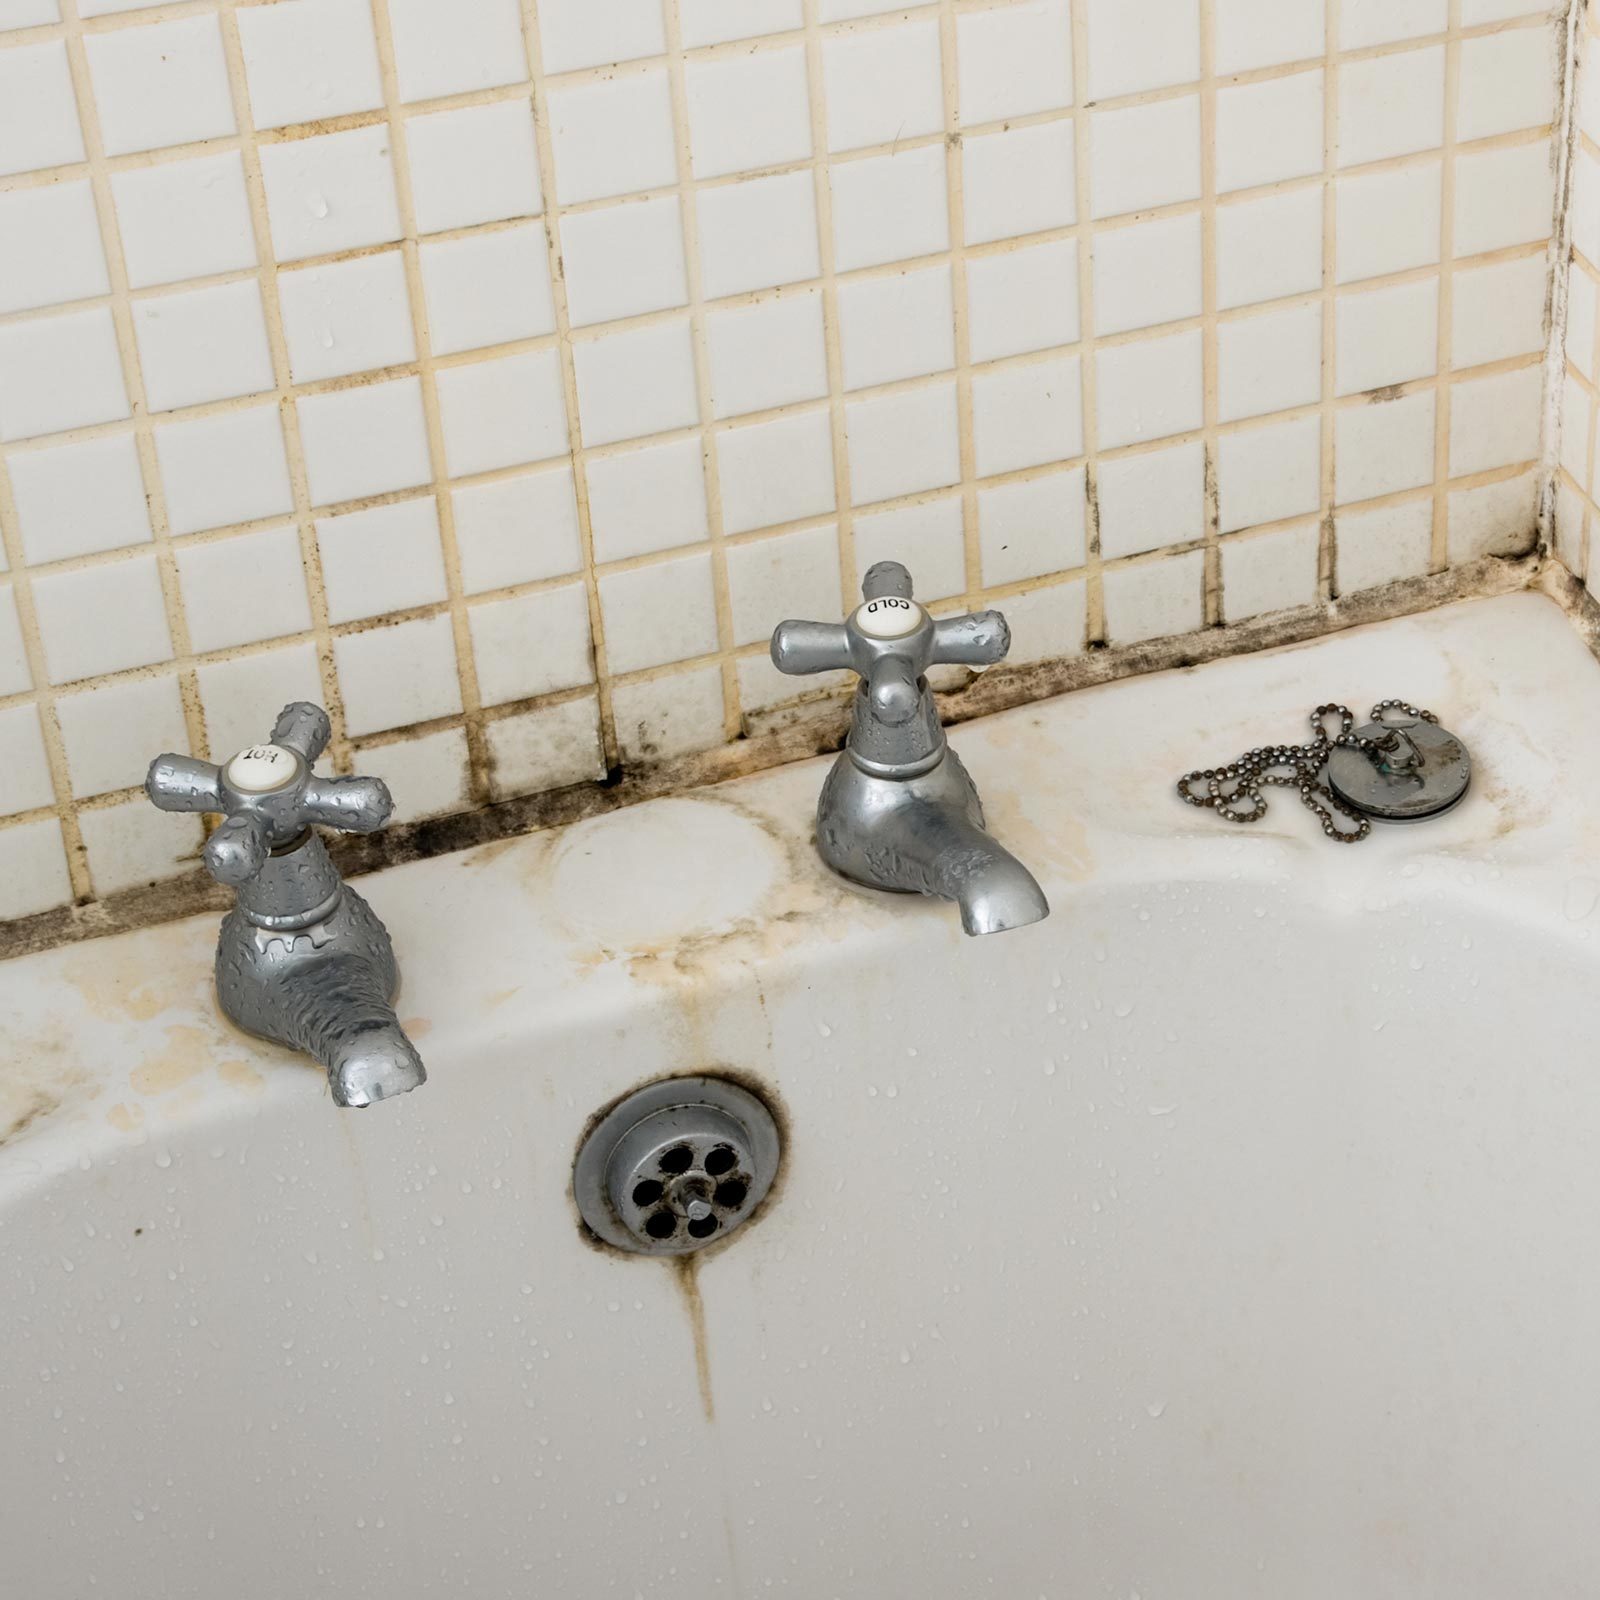 How to Prevent Rust Spots in Your Shower from Shaving Cream Cans